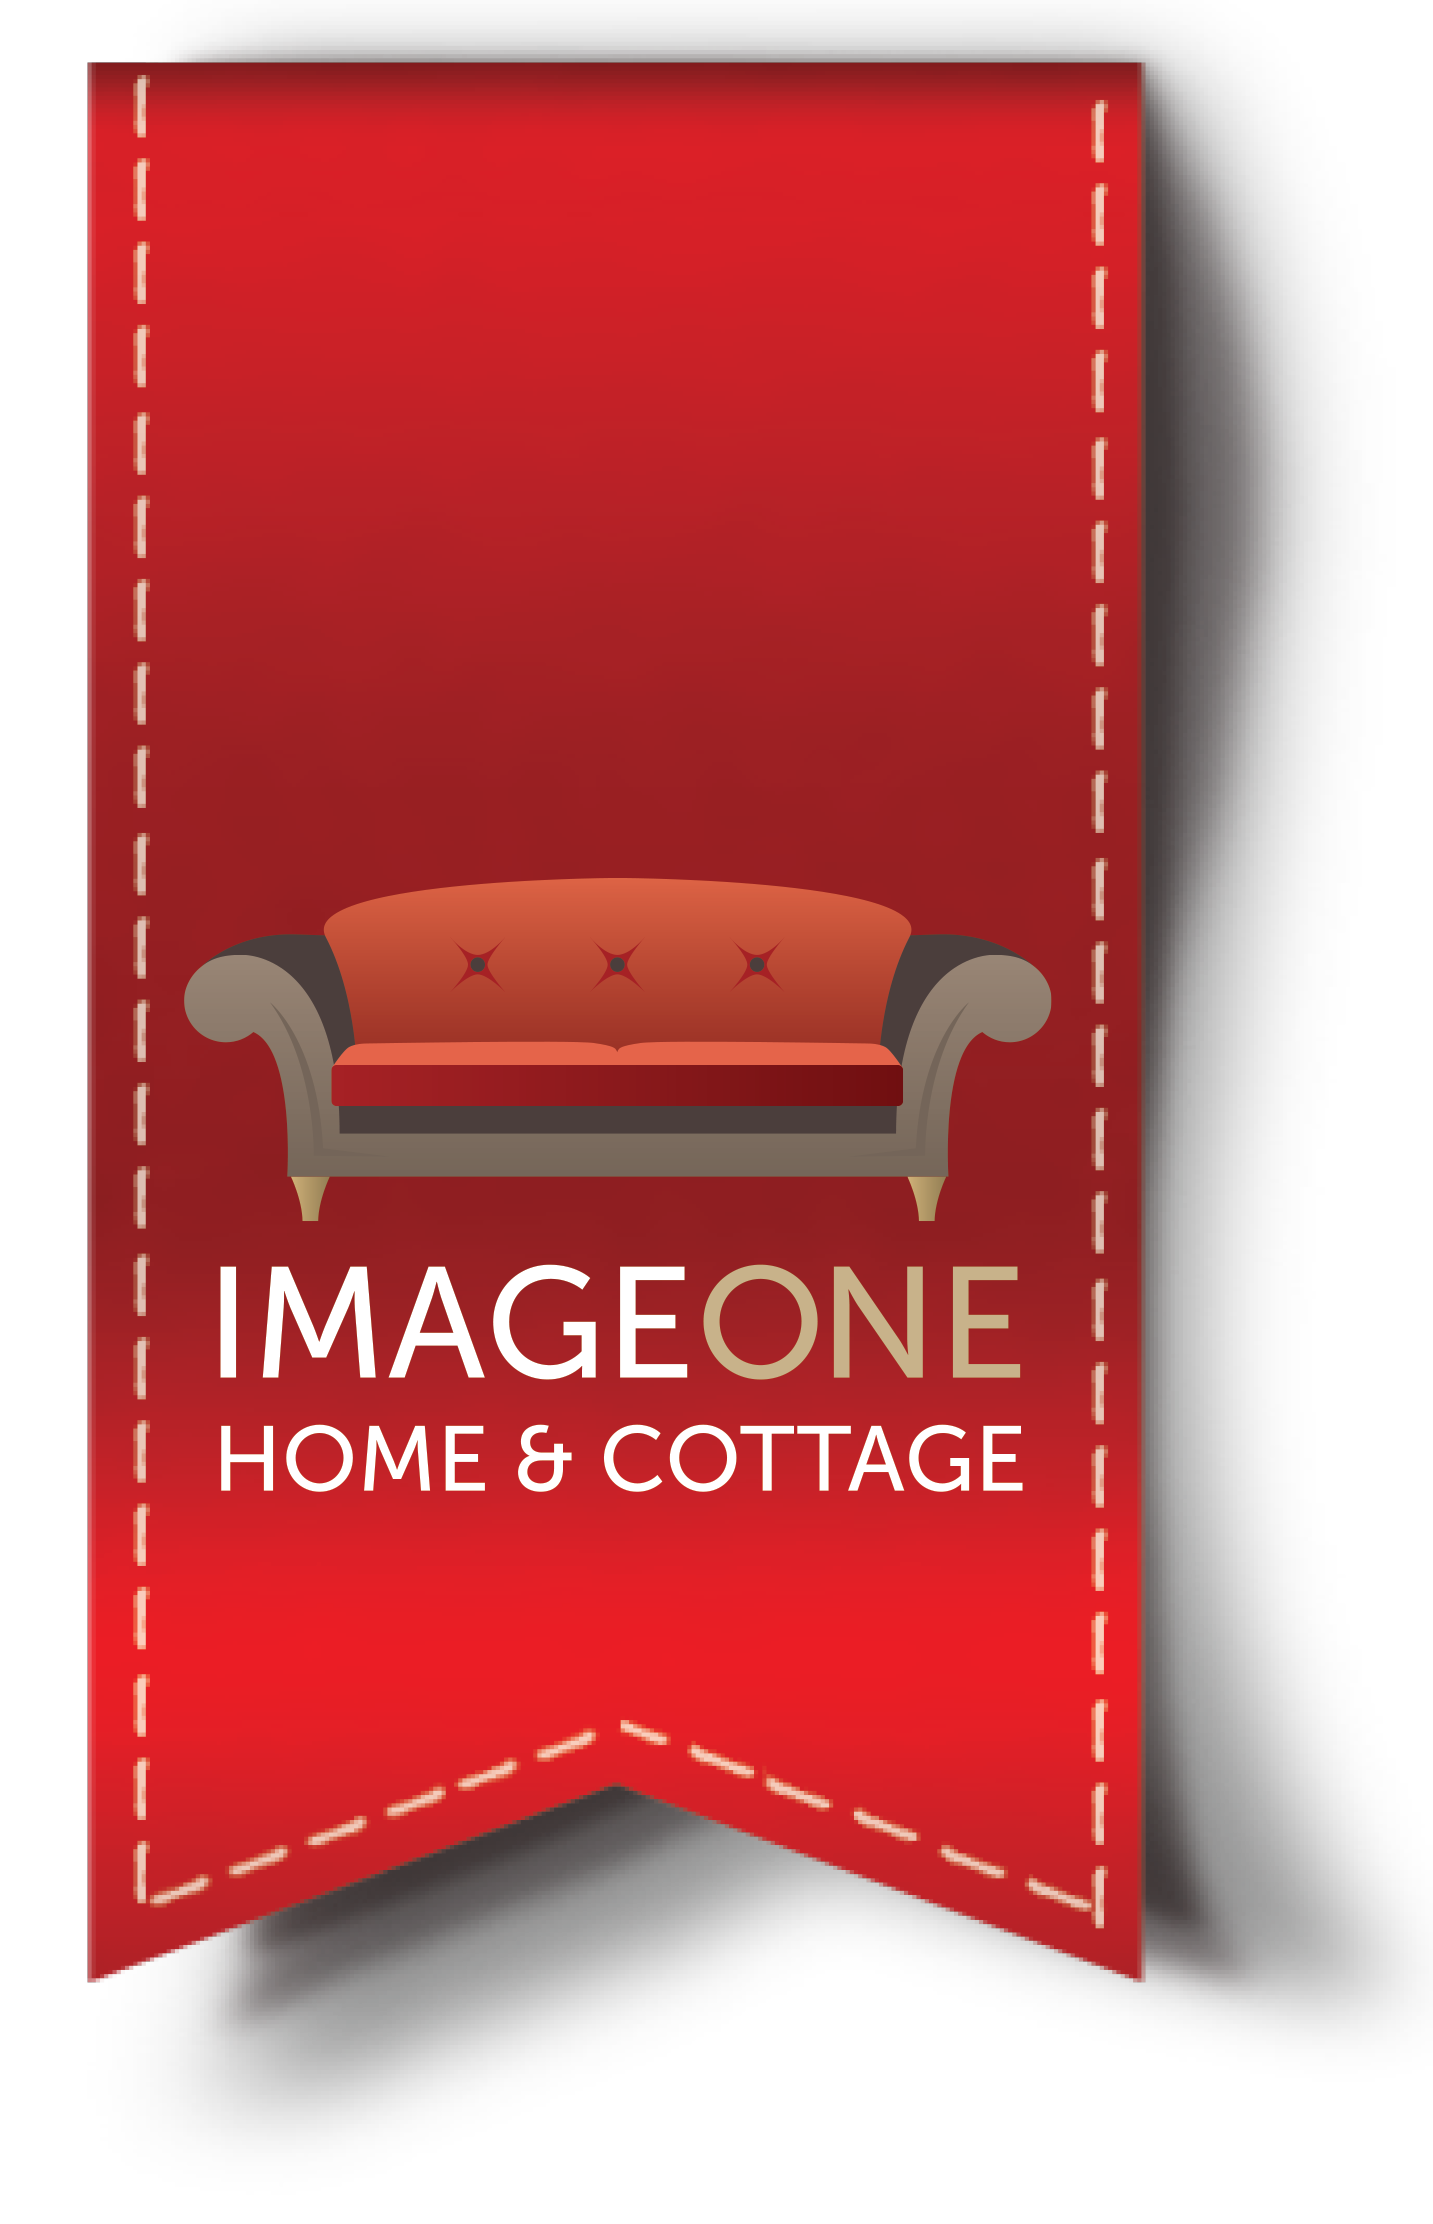 Image One Home & Cottage